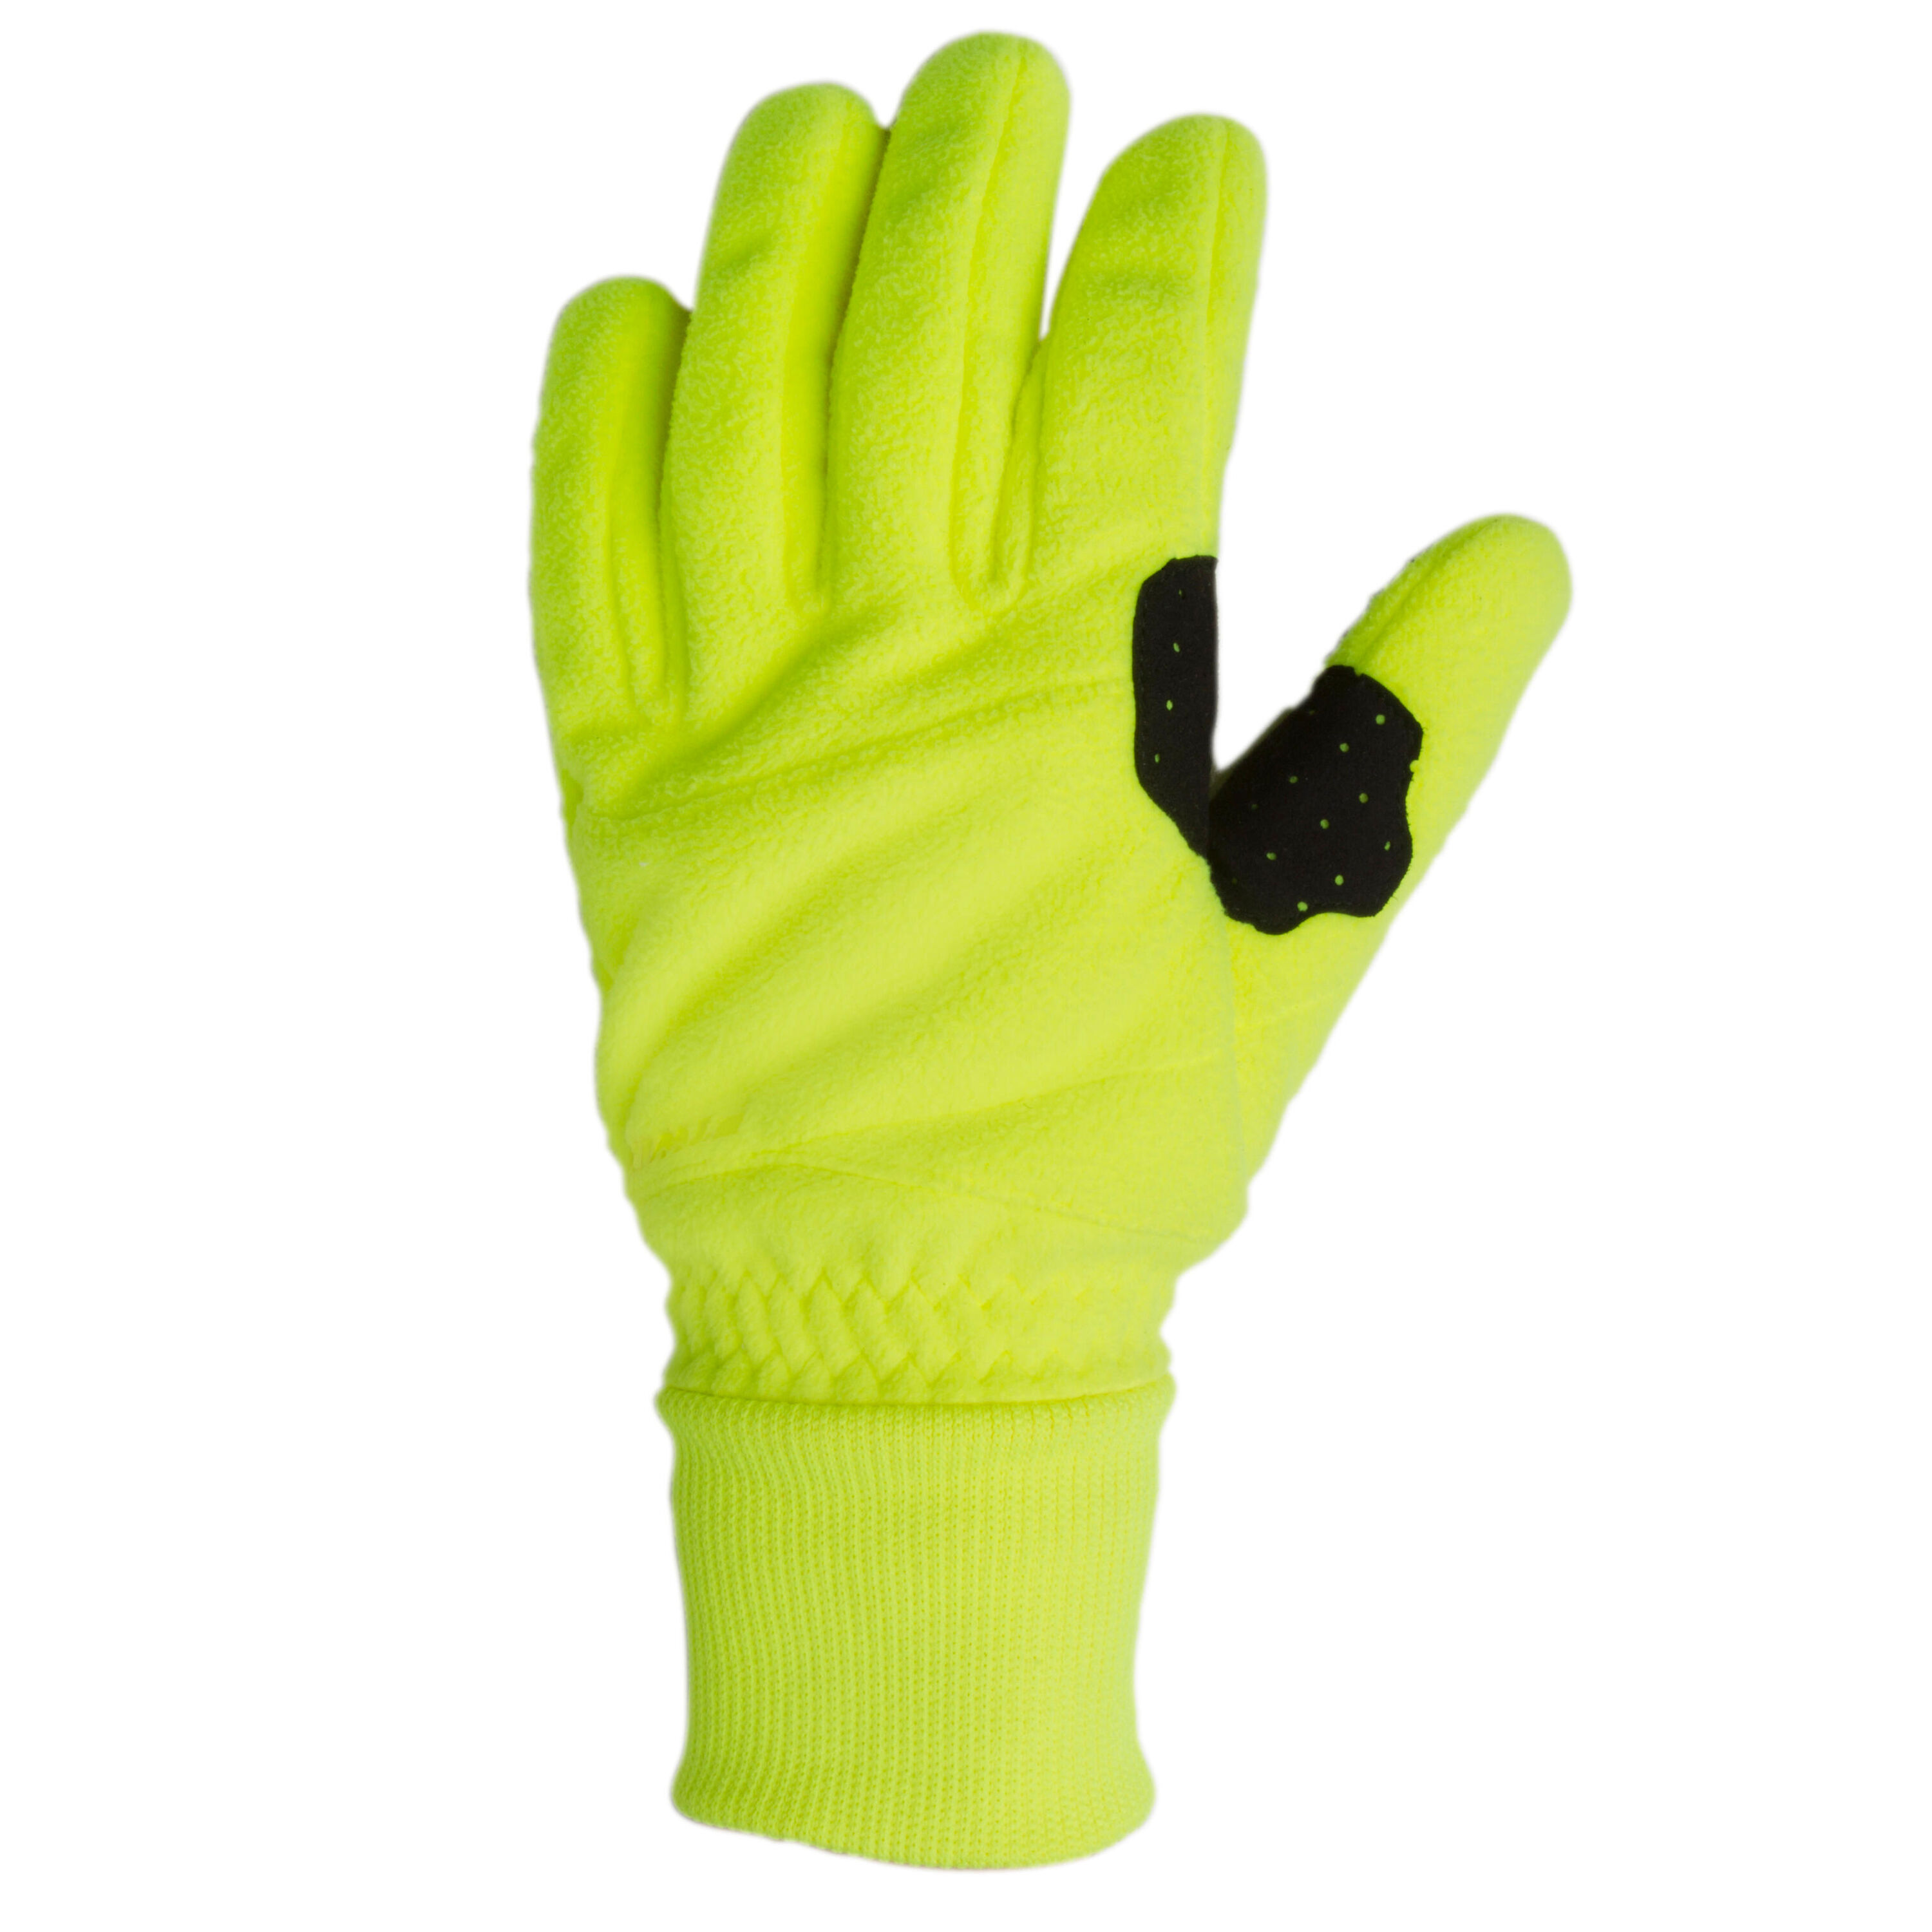 TRIBAN 100 Winter Cycling Gloves - Neon Yellow